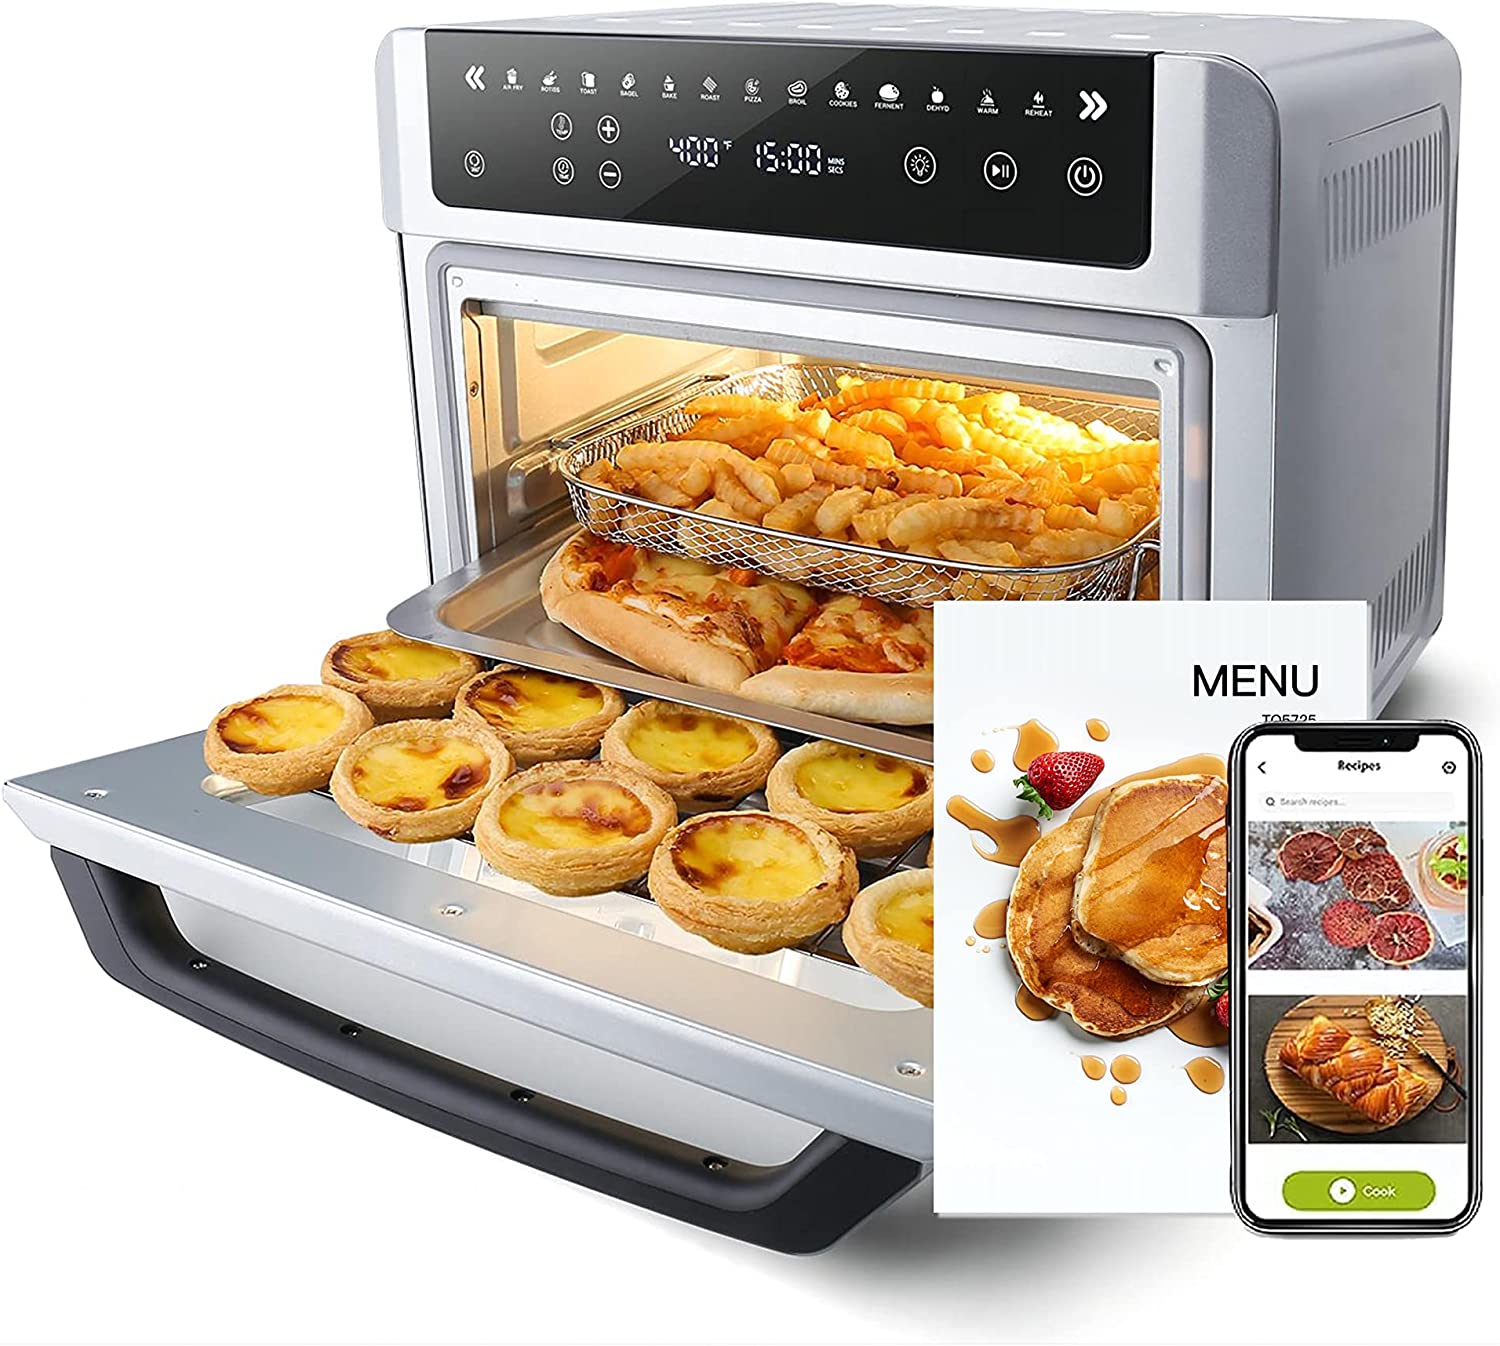  24-QT Countertop Air Frying Toaster Oven - 10-in-1 Large Air  Fryer Oven Combo for Toast, Bake, Broil, 5-7-lb turkey, 10'' Pizza, with  Rotisserie & Dehydrator, Toaster Ovens for Family, Silver 